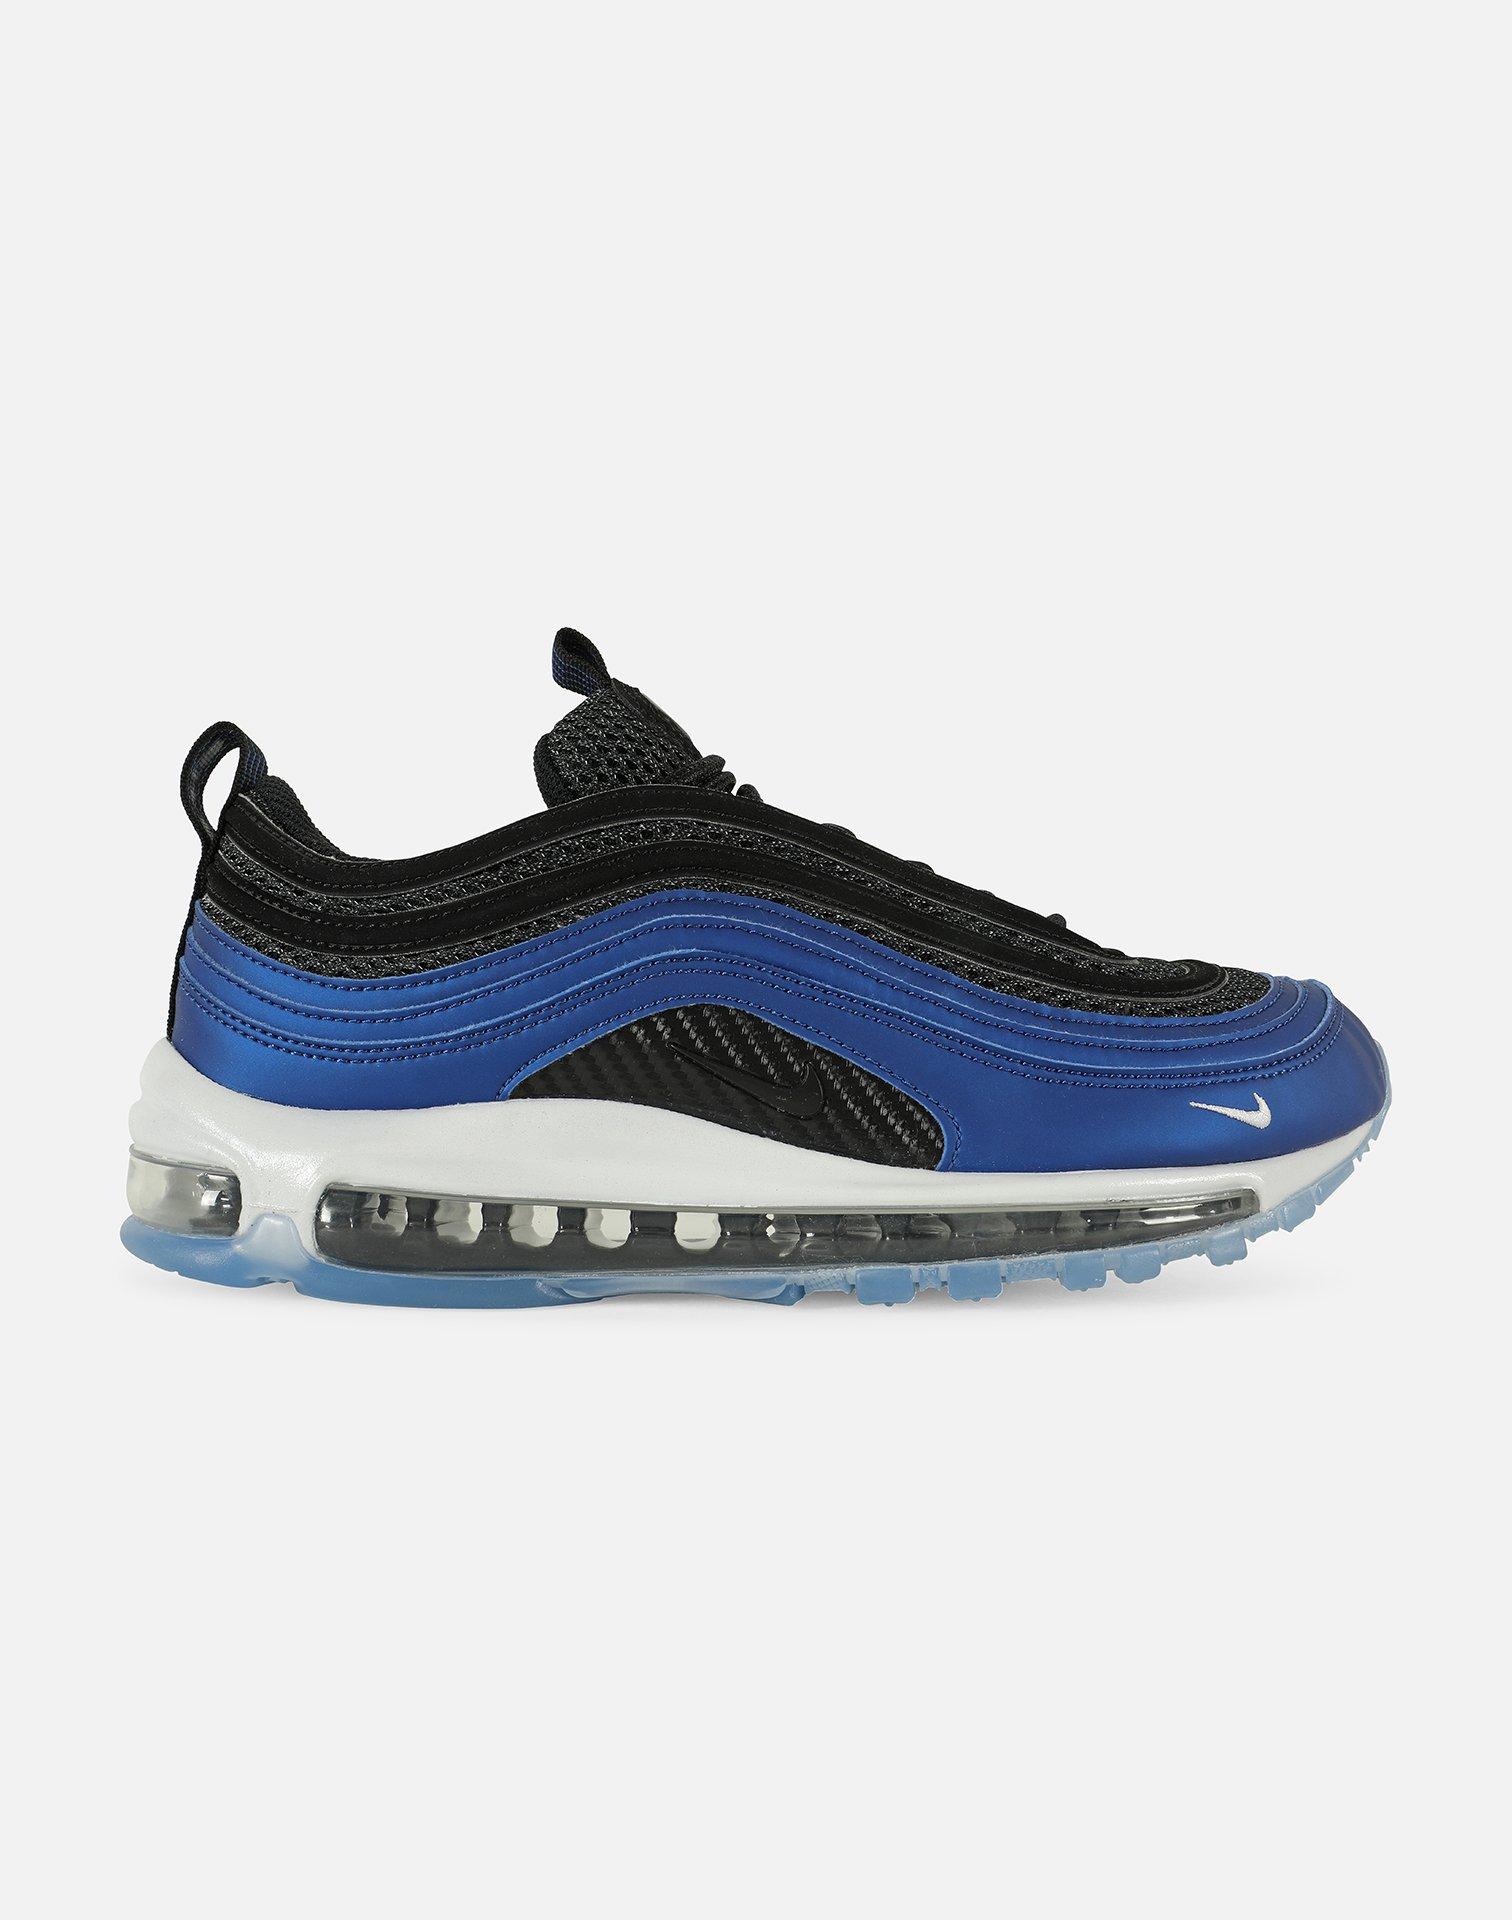 Nike Synthetic Air Max 97 Foamposite in Blue for Men - Lyst